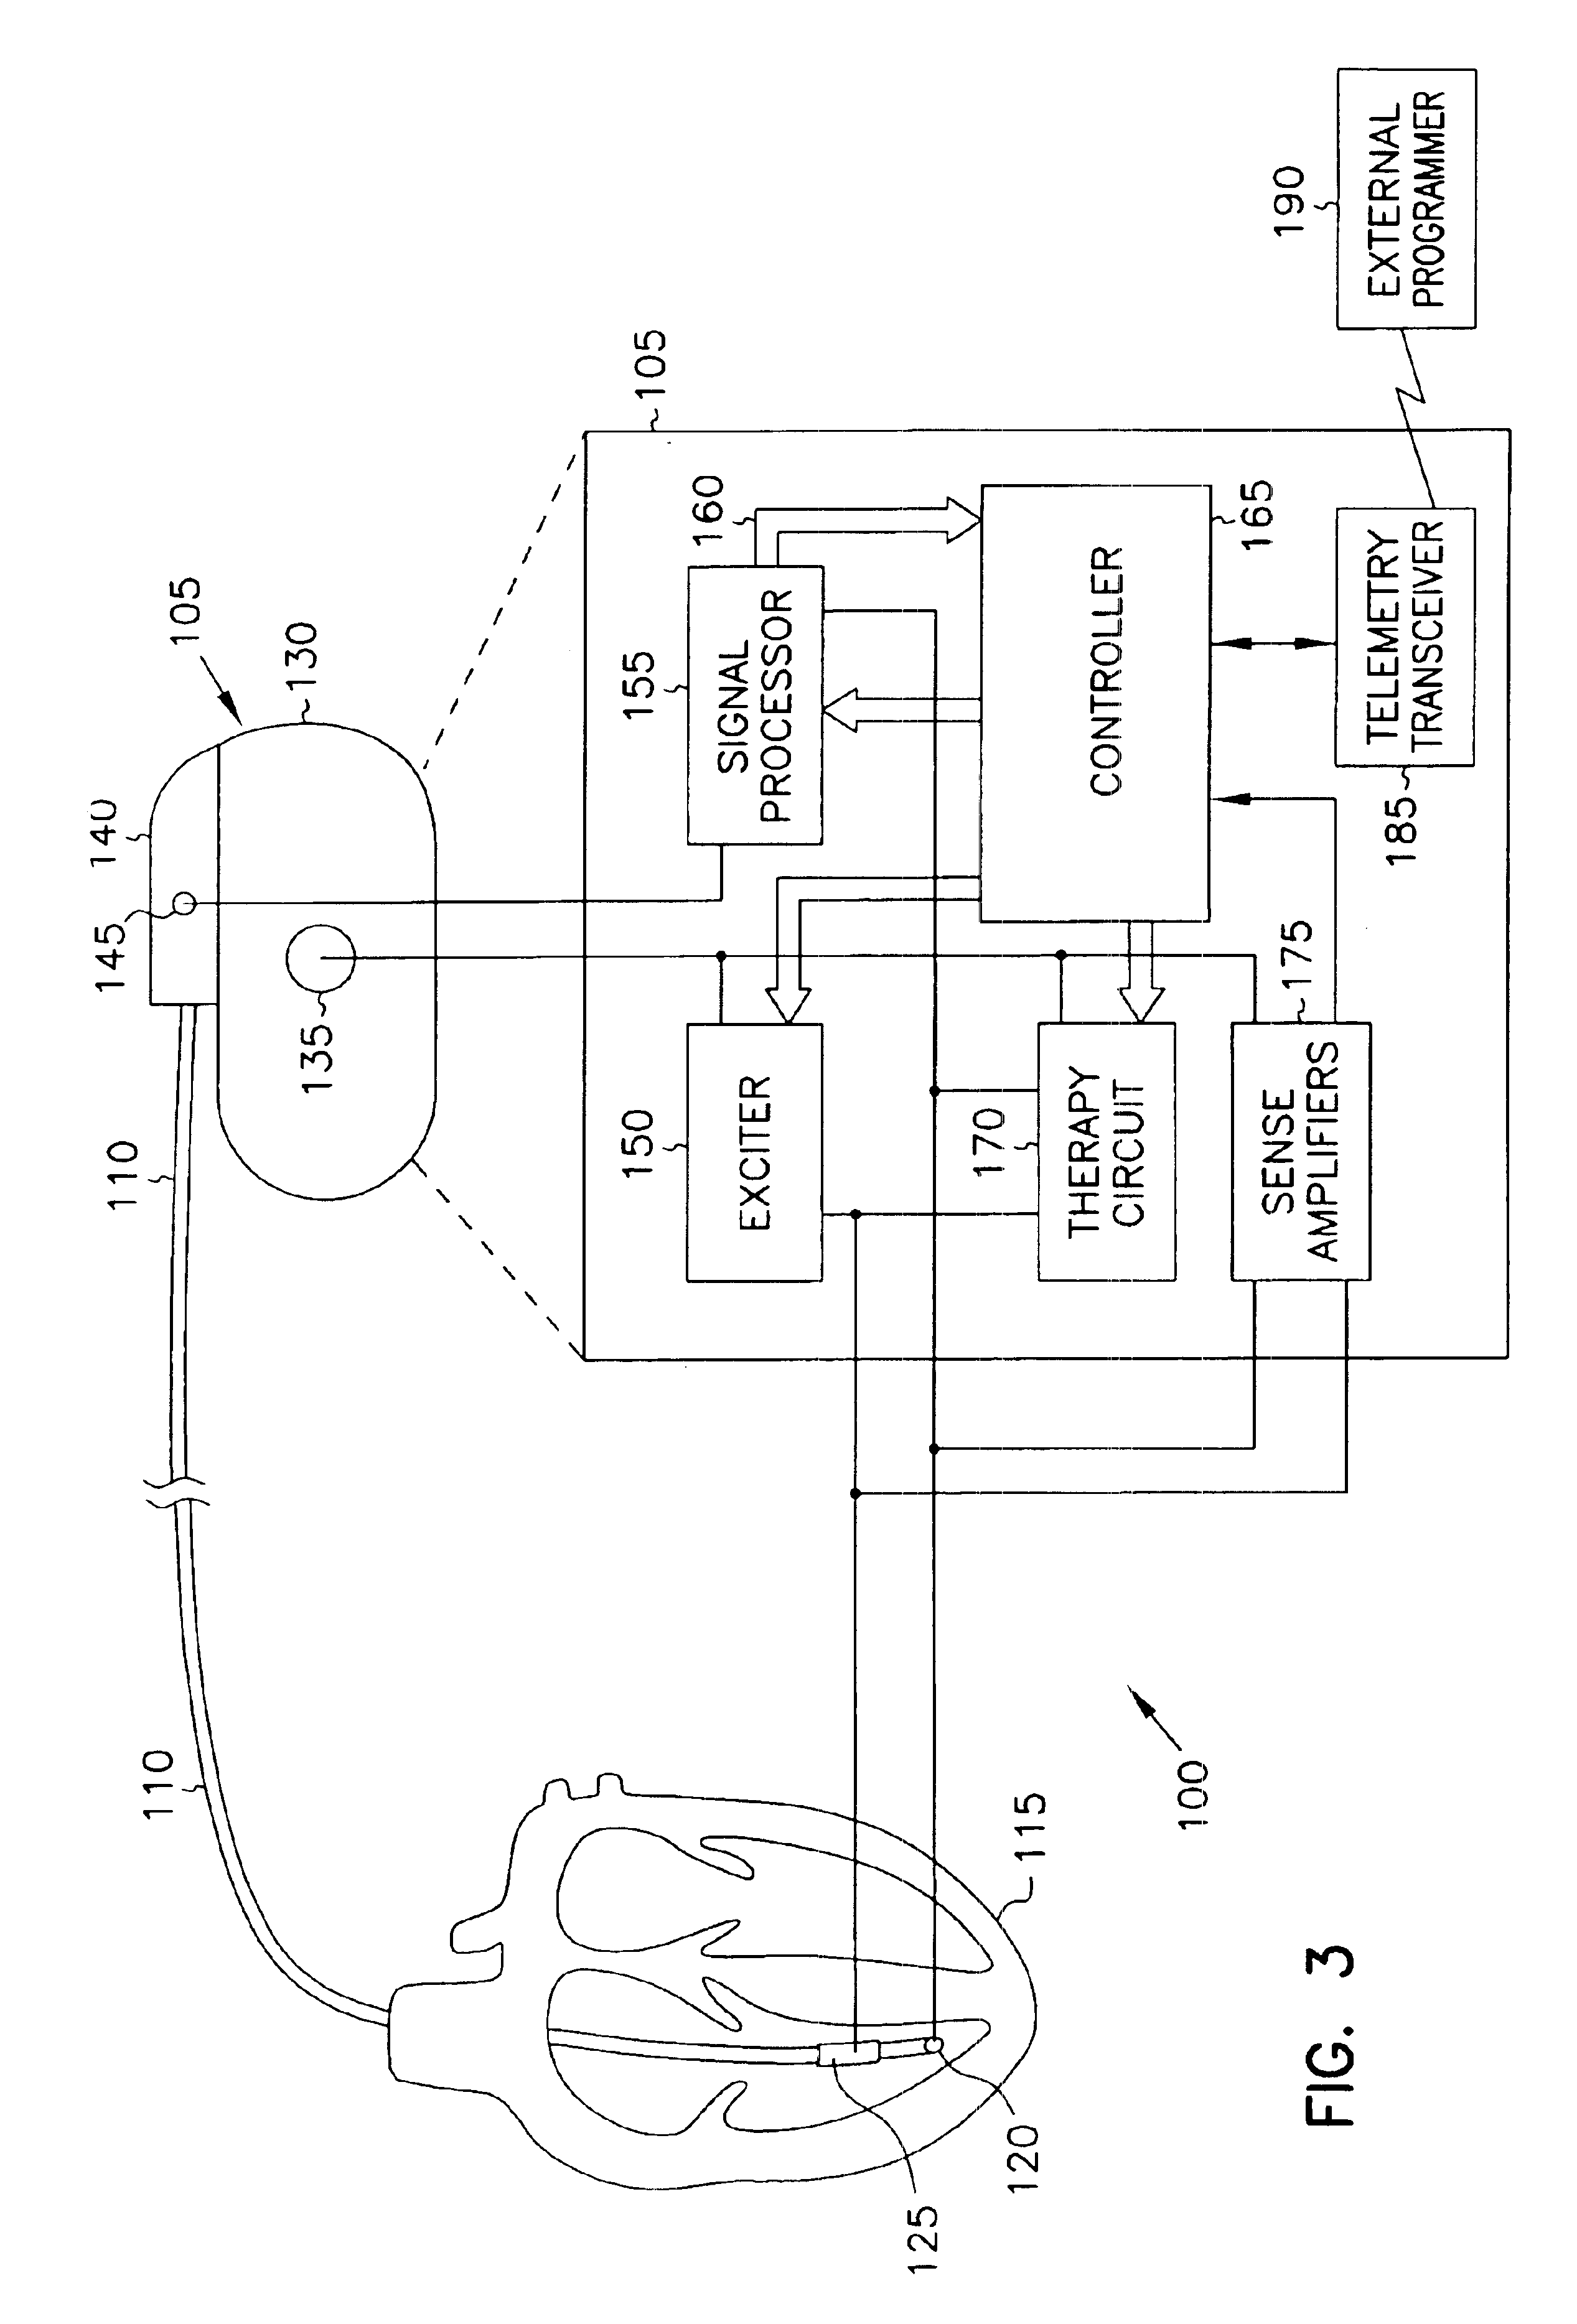 Minute ventilation sensor with automatic high pass filter adjustment